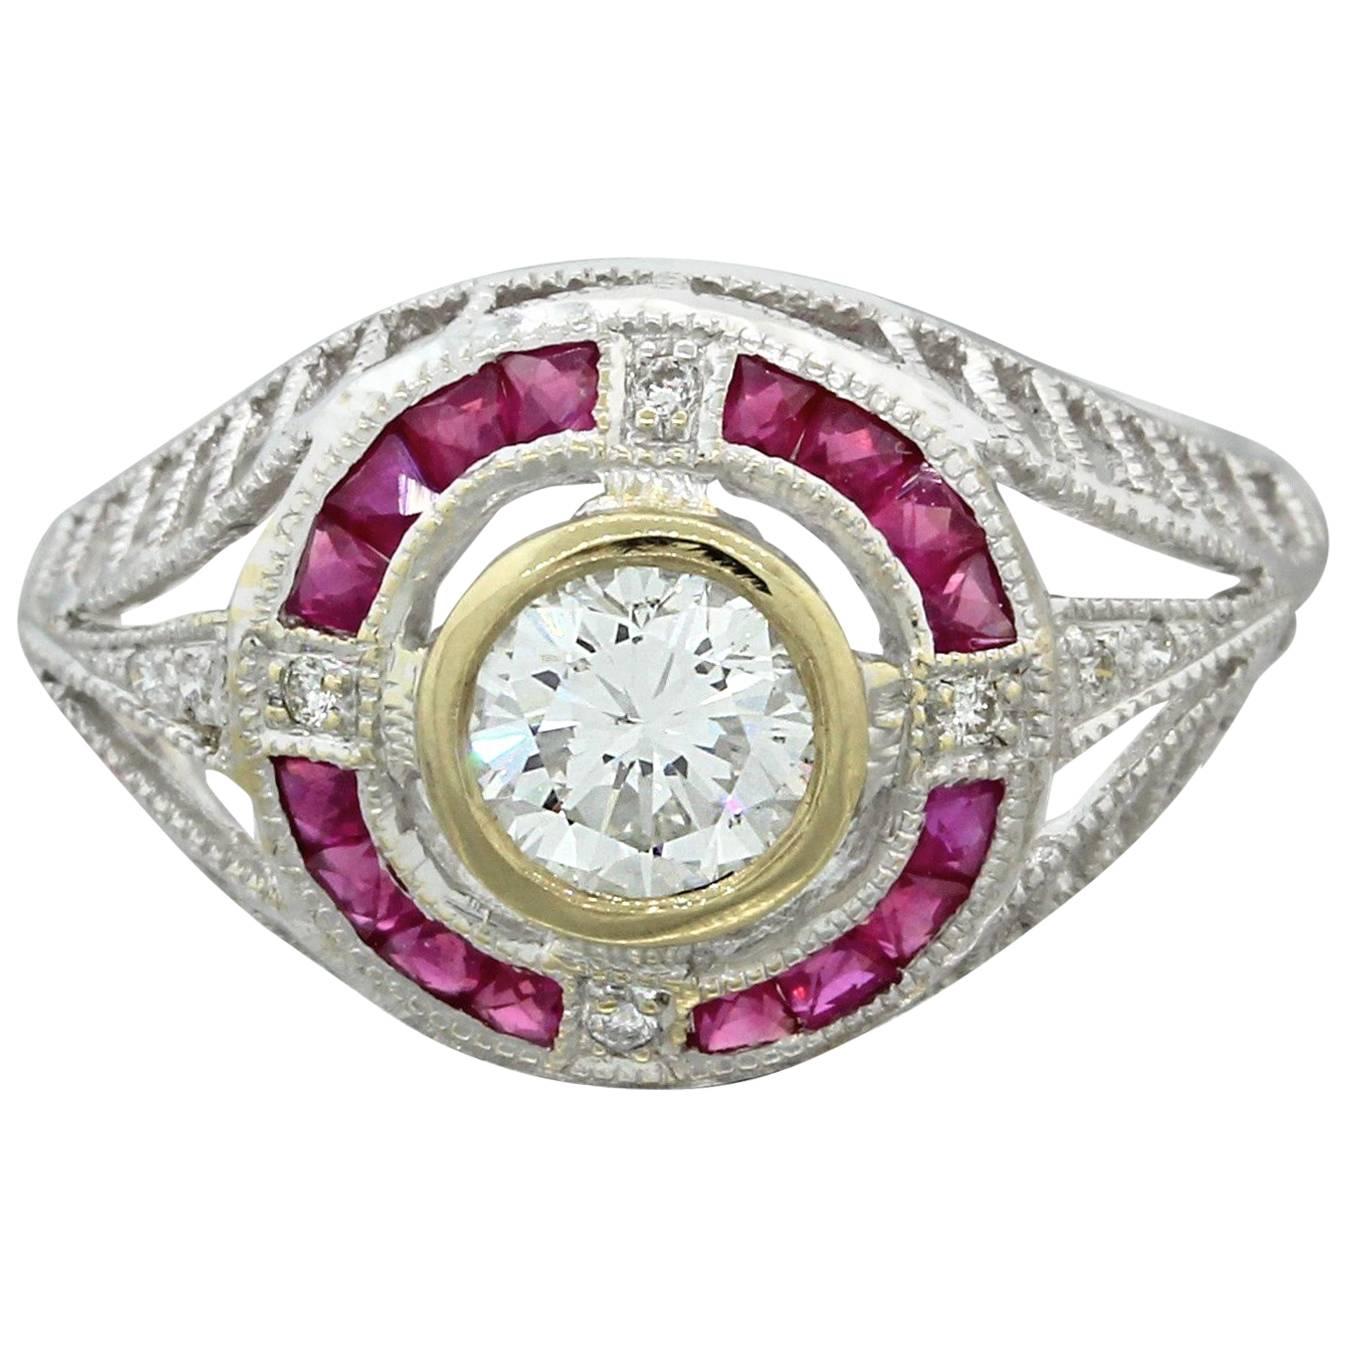 1930s Art Deco 1.05 Carat Diamond Ruby Solid Gold Engagement Ring EGL For Sale